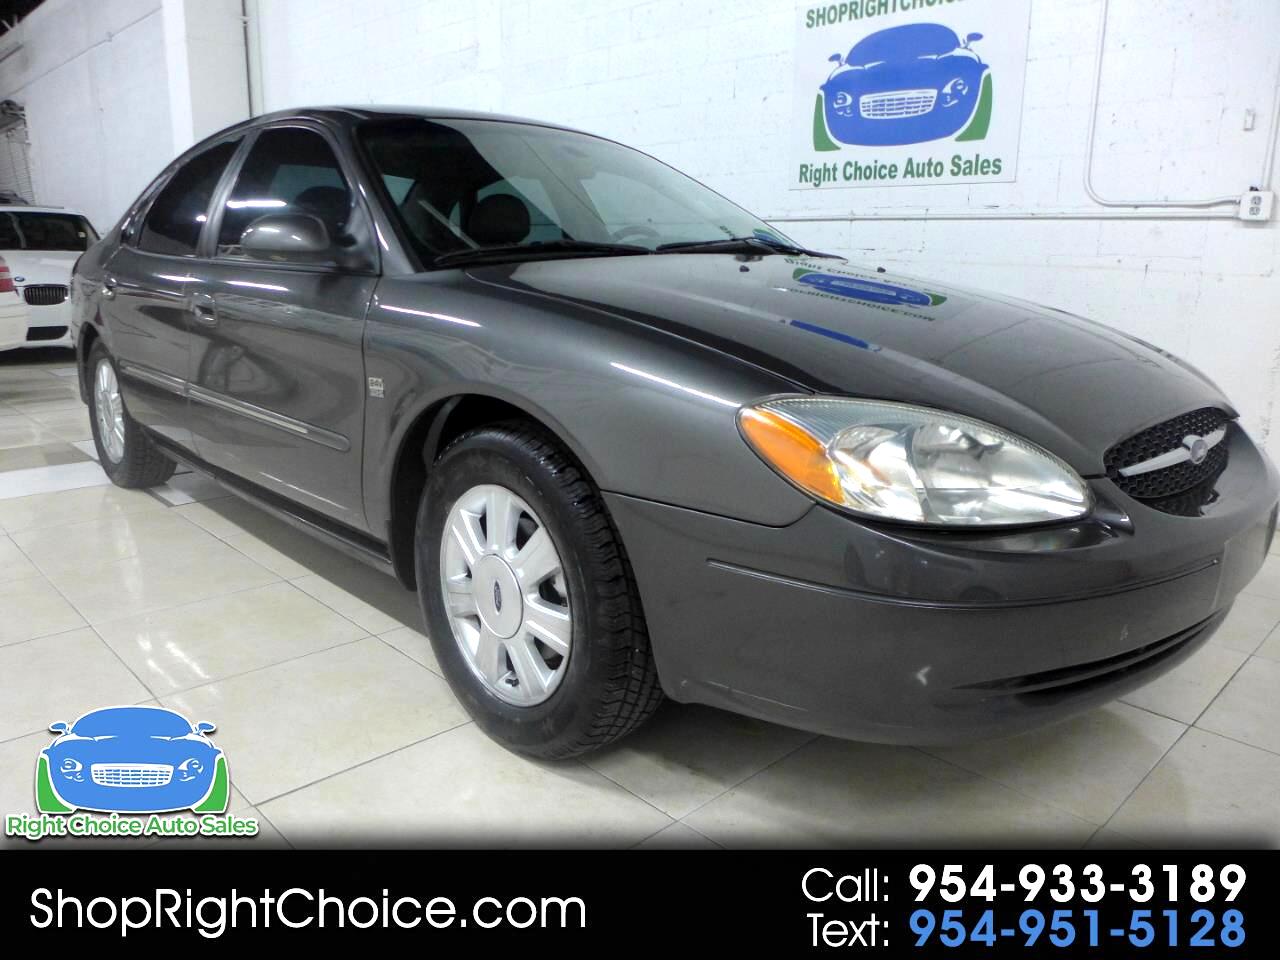 Used 2003 Ford Taurus Sel Deluxe For Sale In Pompano Beach